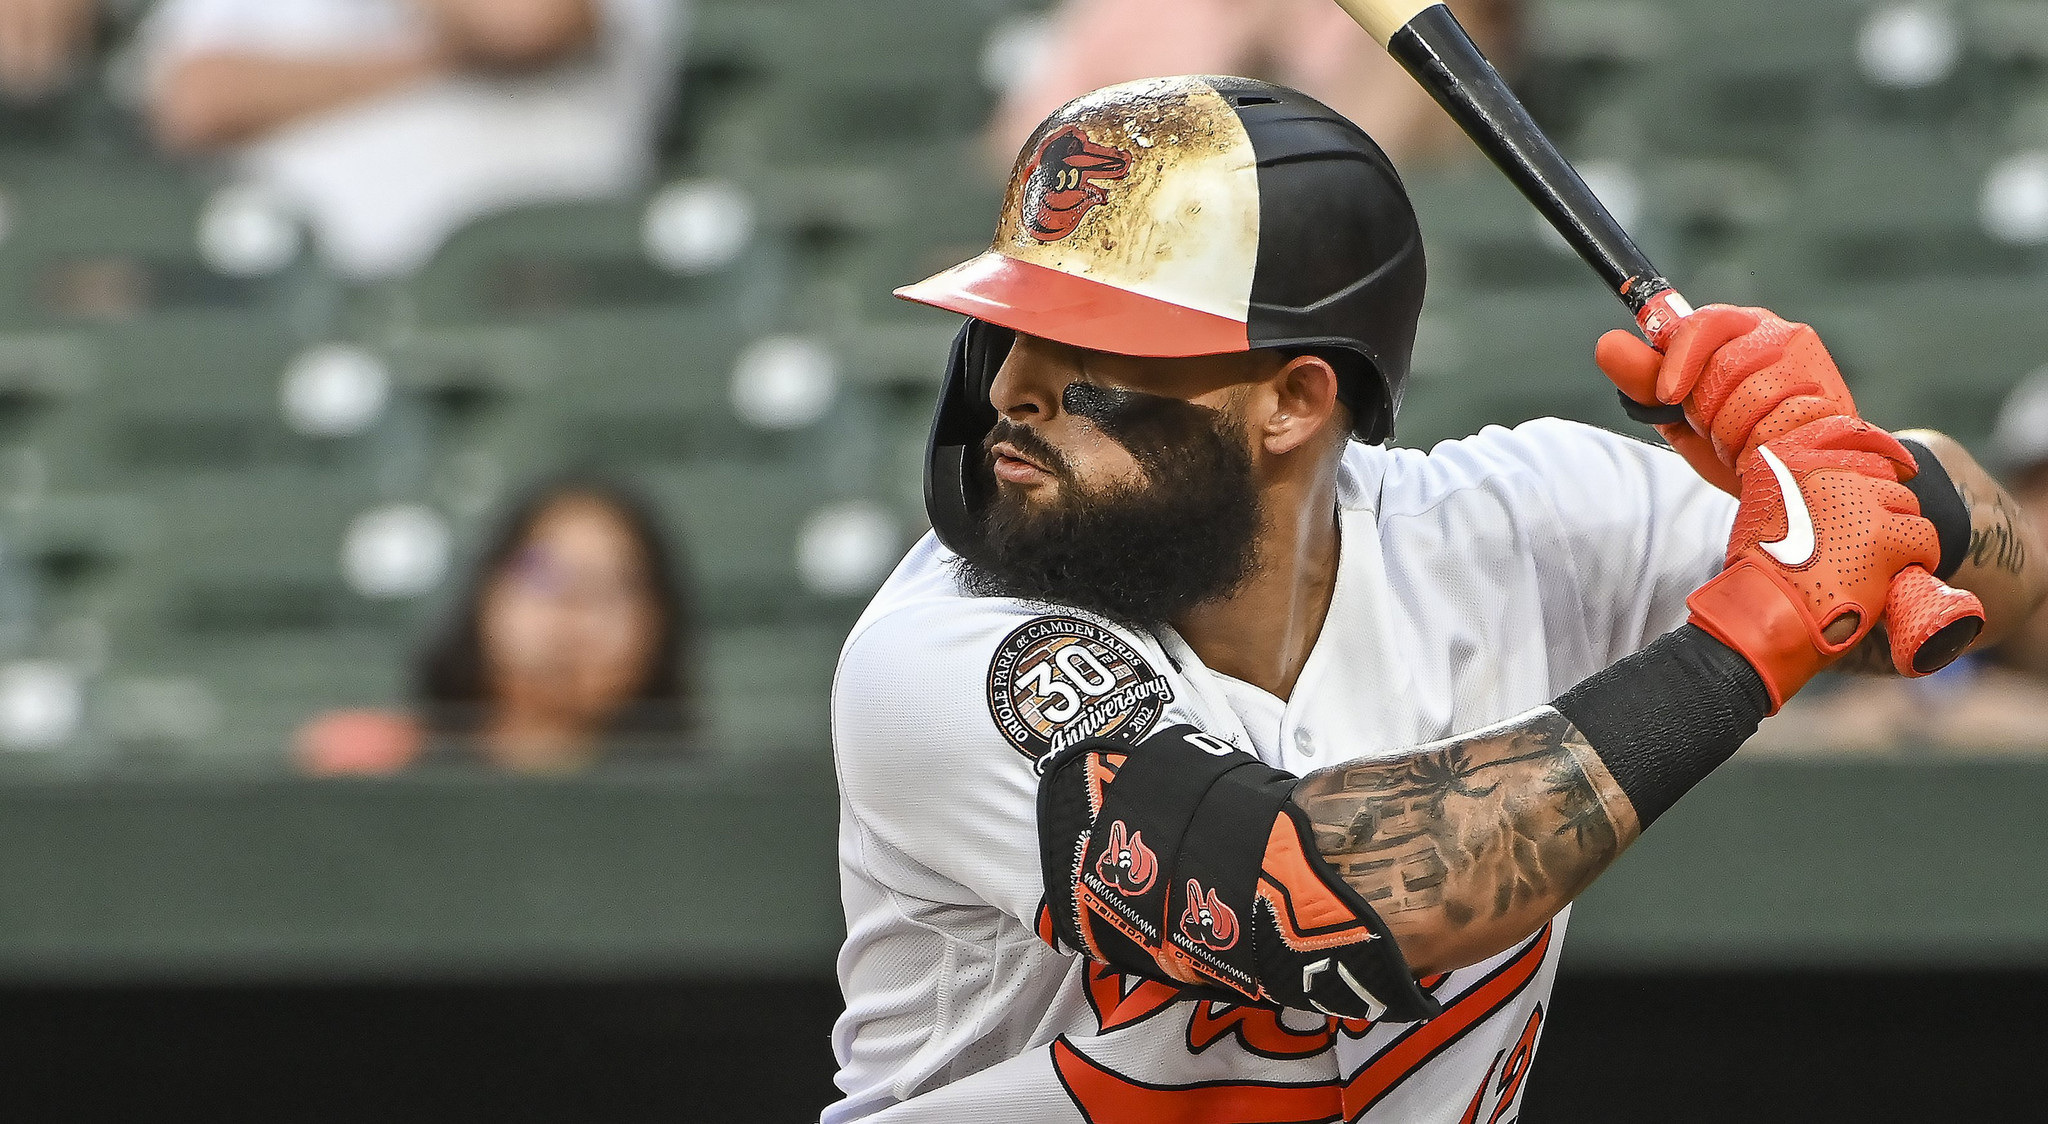 With the aim to 'do damage,' Rougned Odor has turned his Orioles